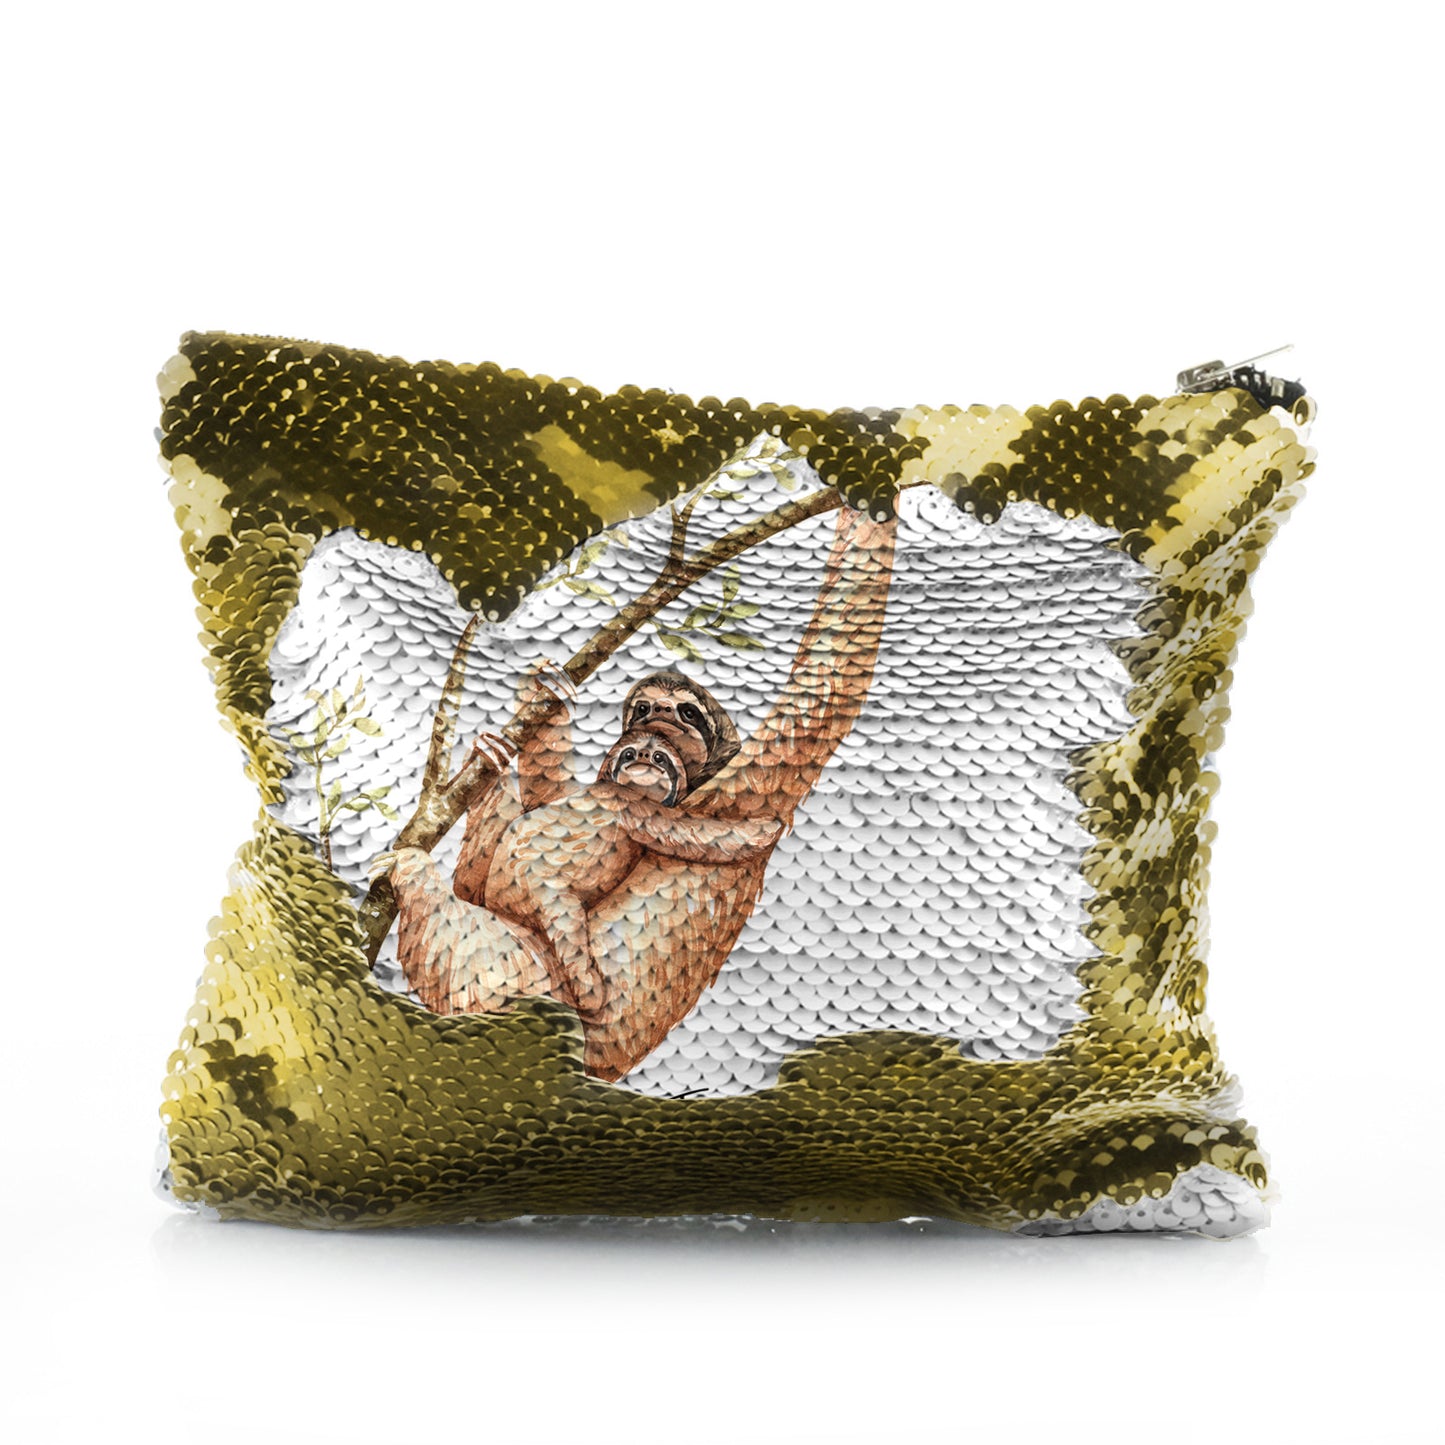 Personalised Sequin Zip Bag with Welcoming Text and Climbing Mum and Baby Sloths